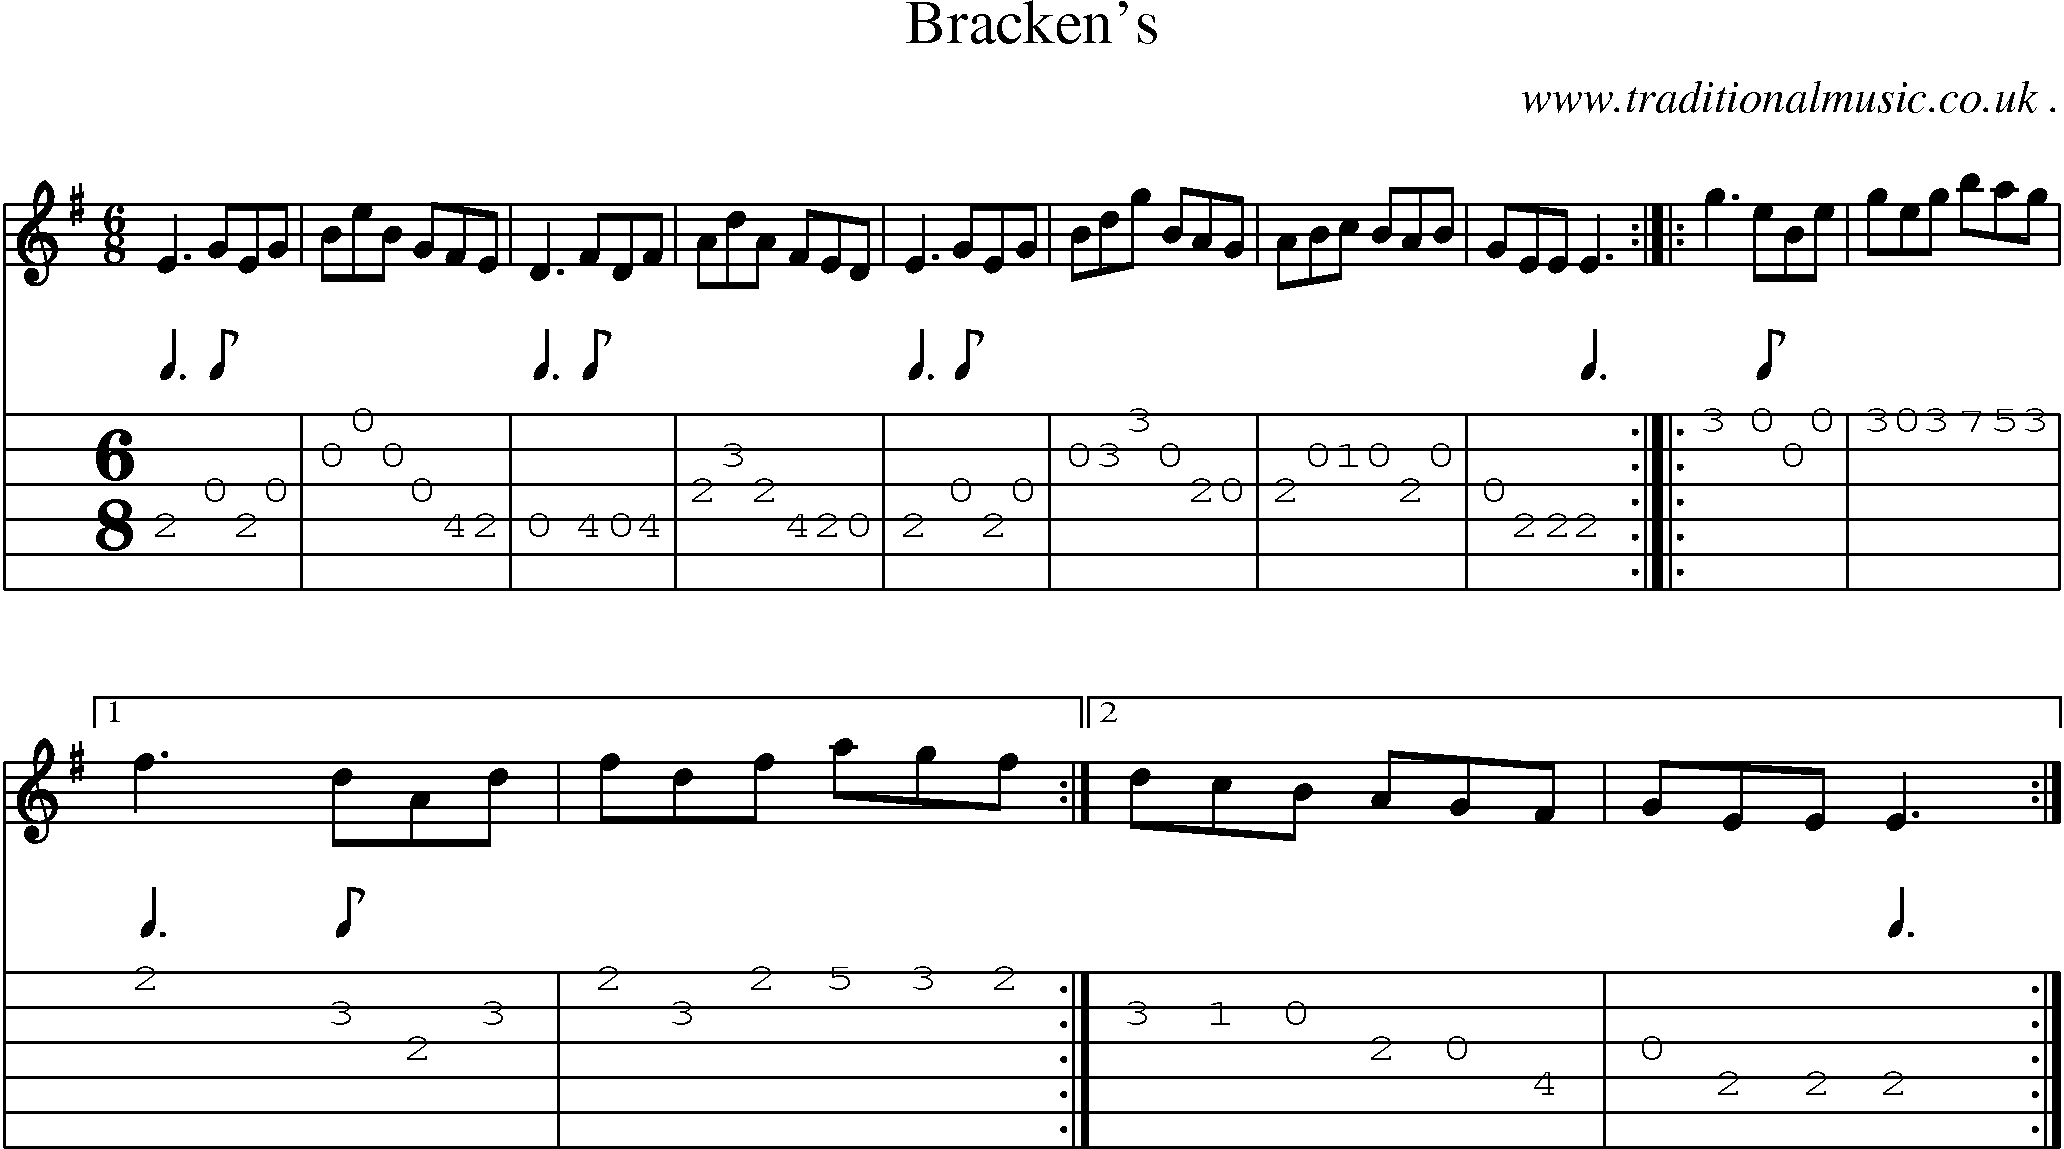 Sheet-Music and Guitar Tabs for Brackens